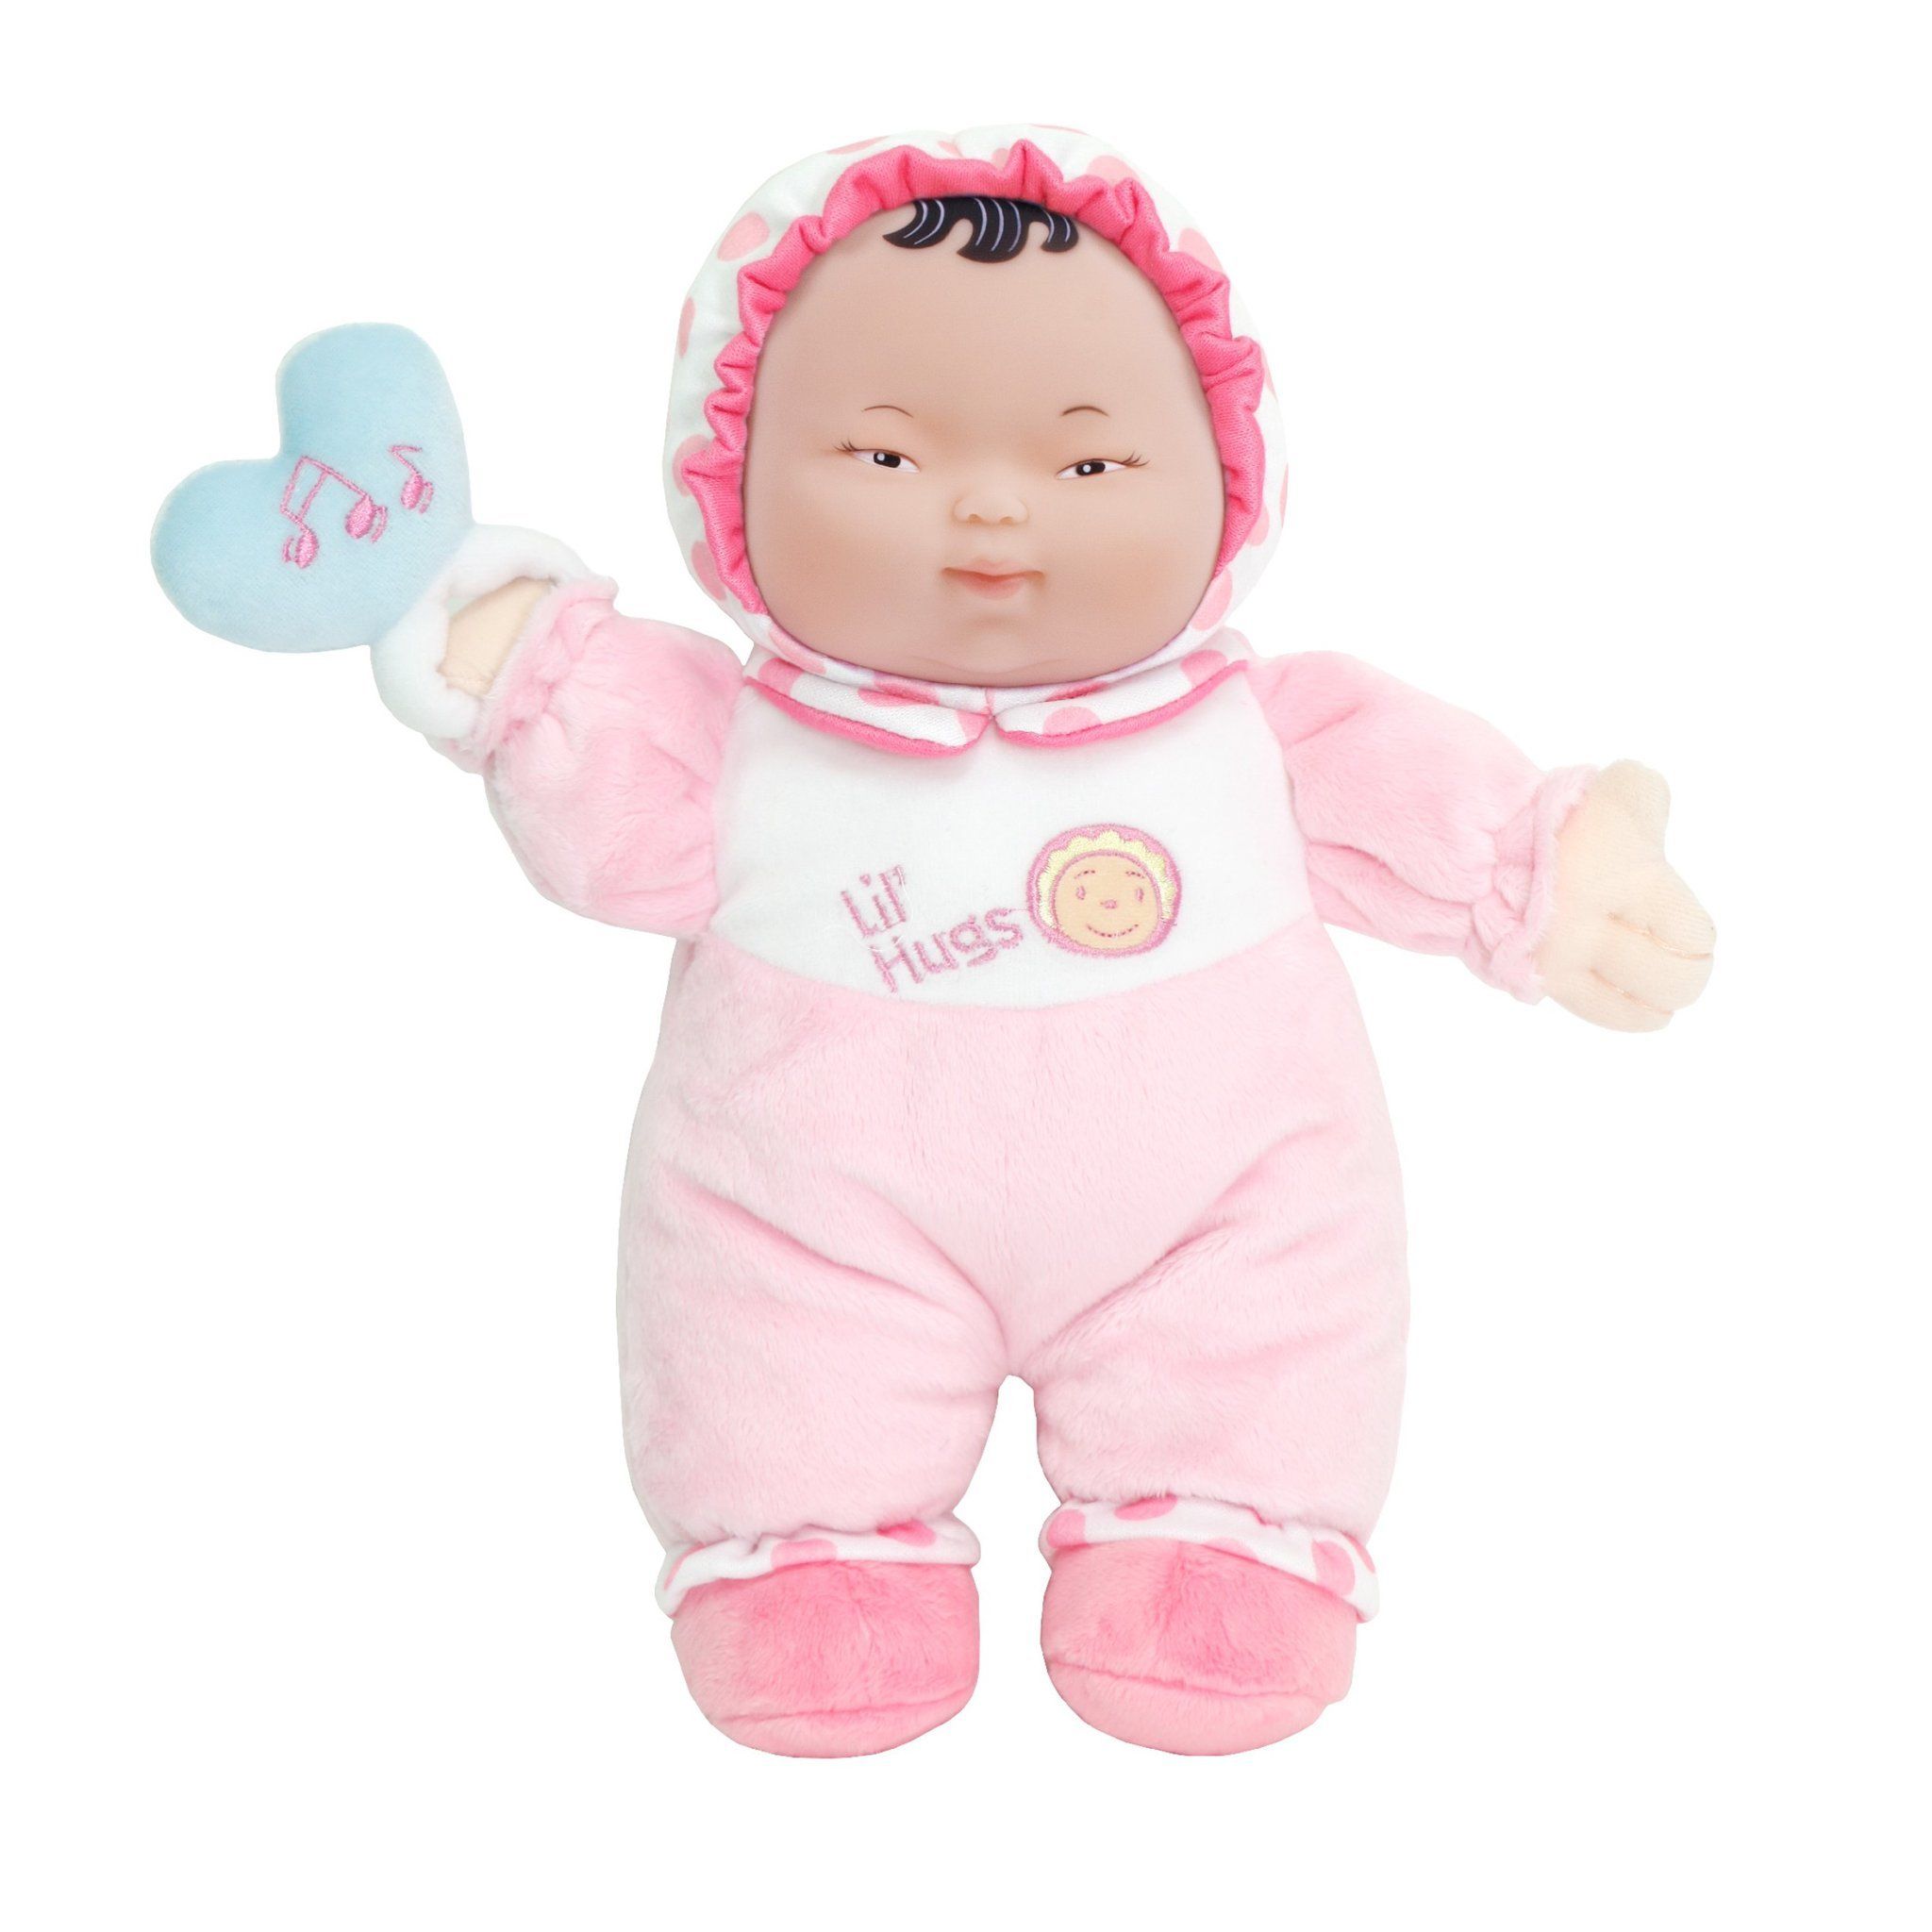 Buy Dolls By Berenguer 48002 Lil Hugs Soft Doll - Asian - 11